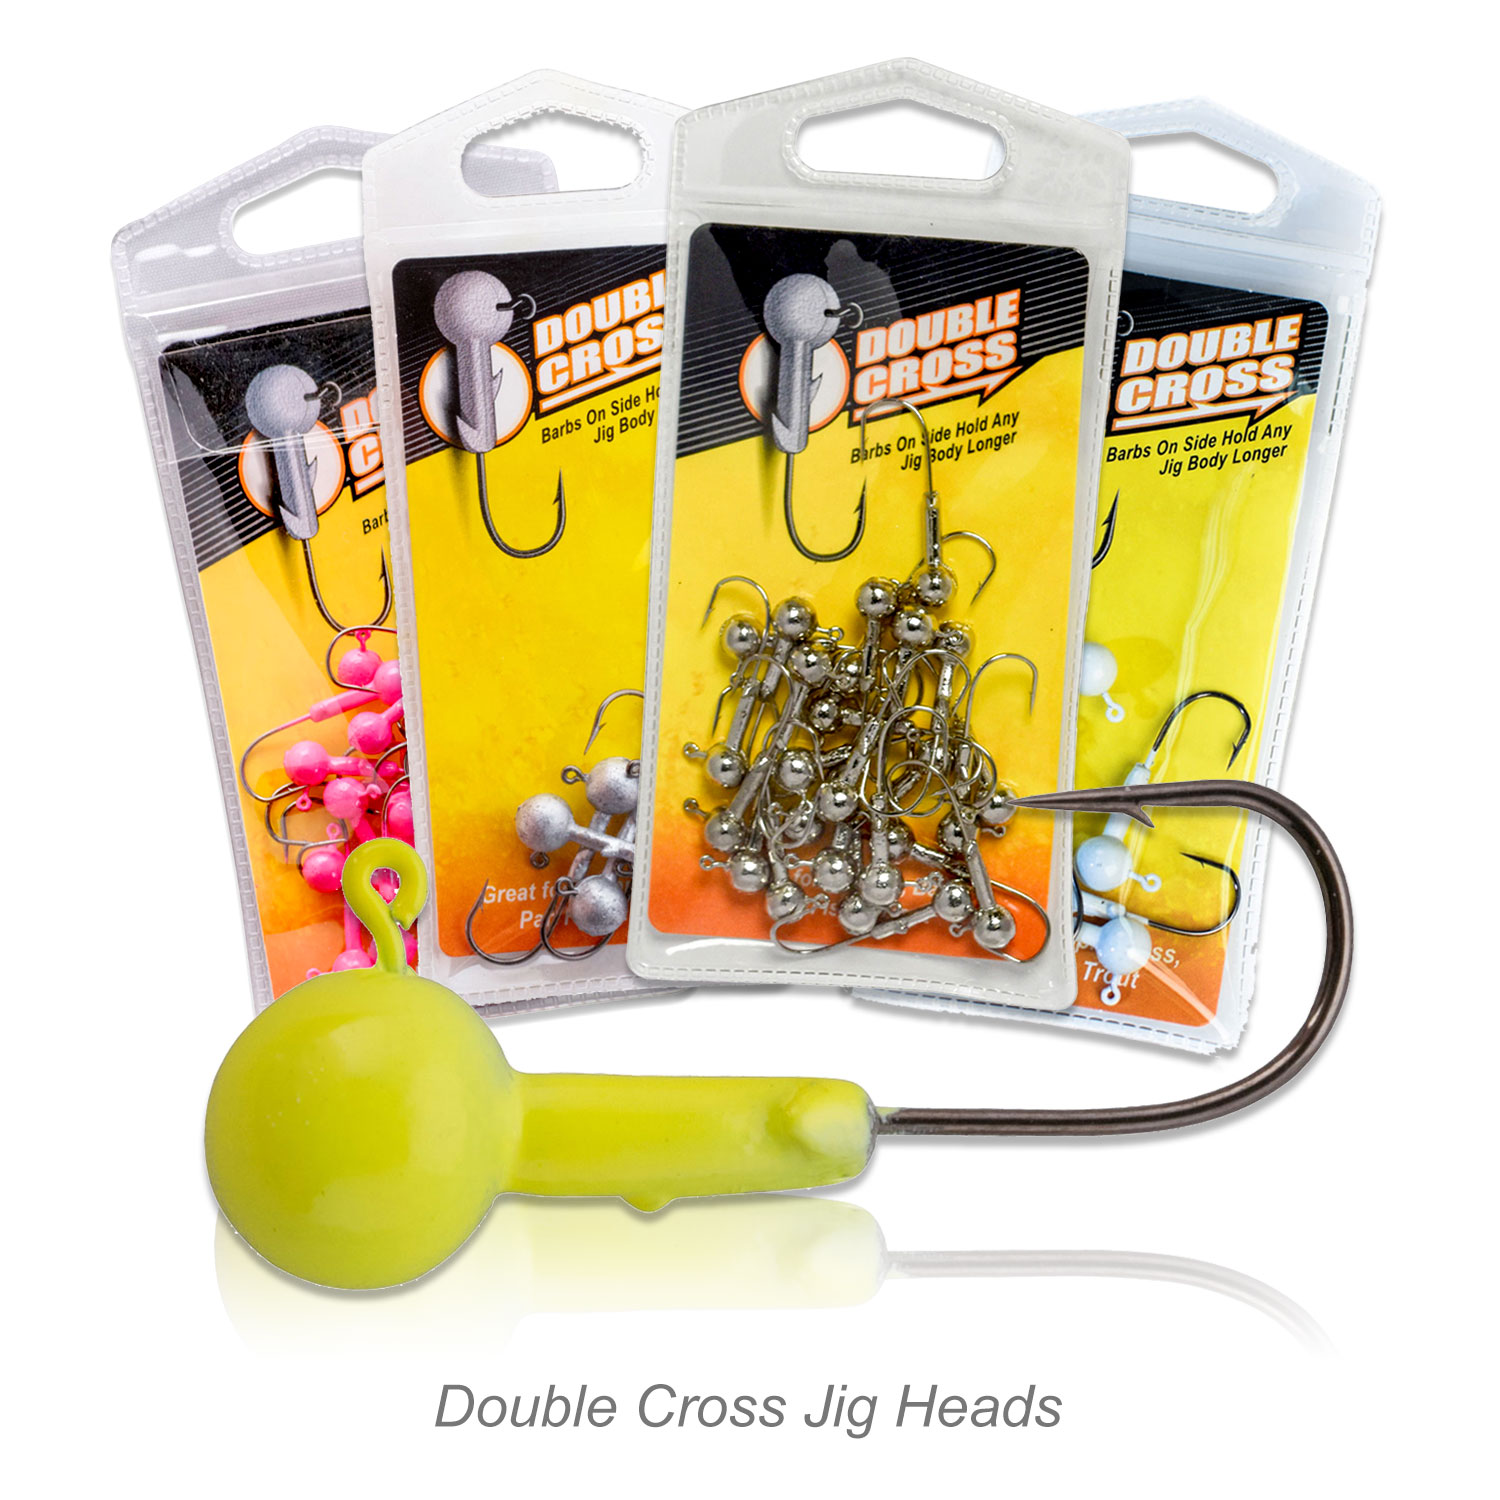 White 1/16 ounce, Crappie Magnet Double Cross 25 Packs Jig Heads 